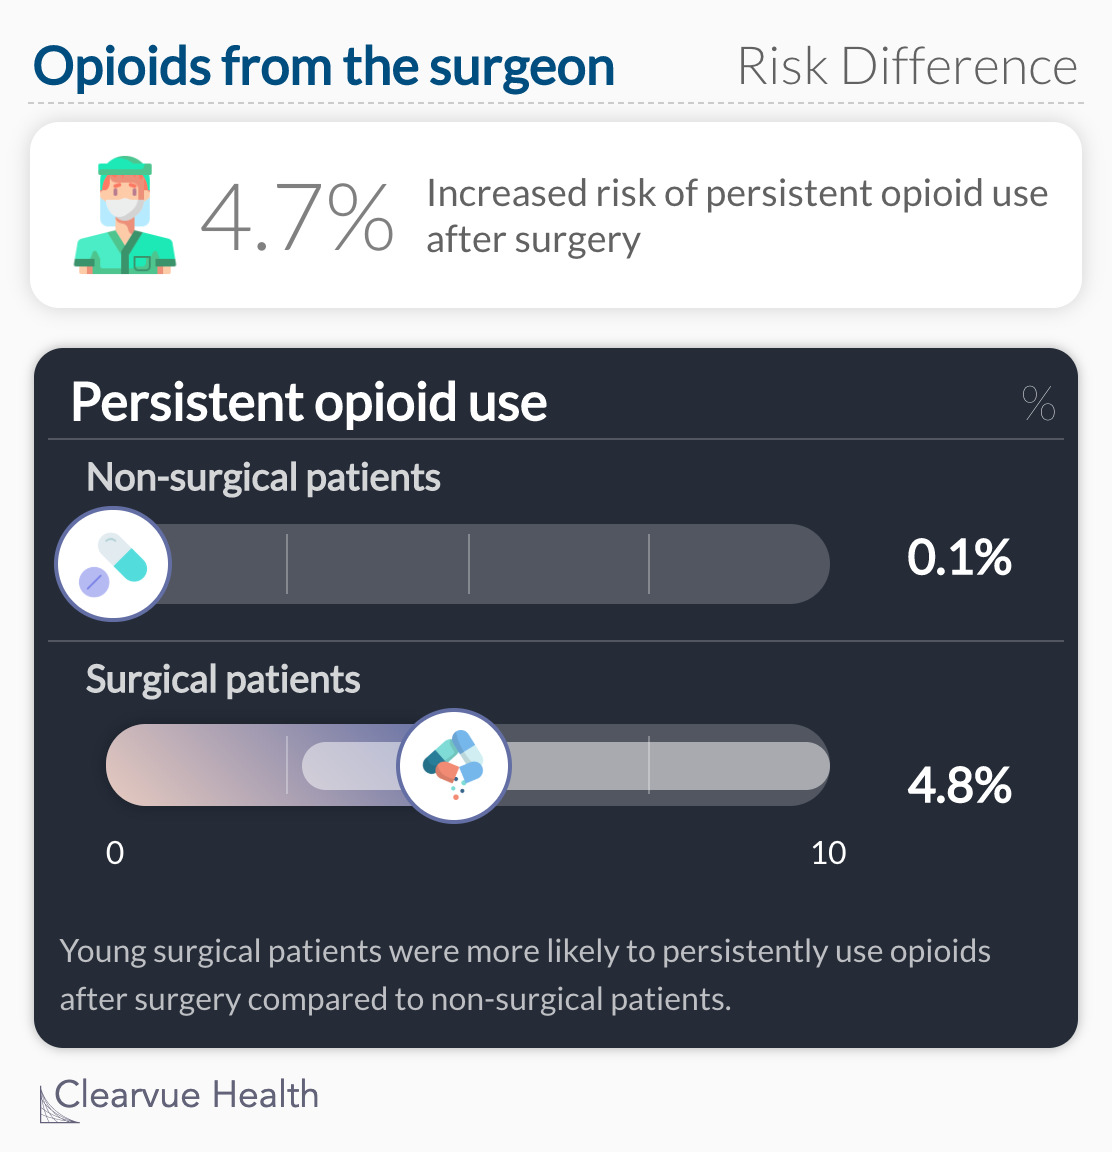 Opioids from the surgeon: Risk Difference